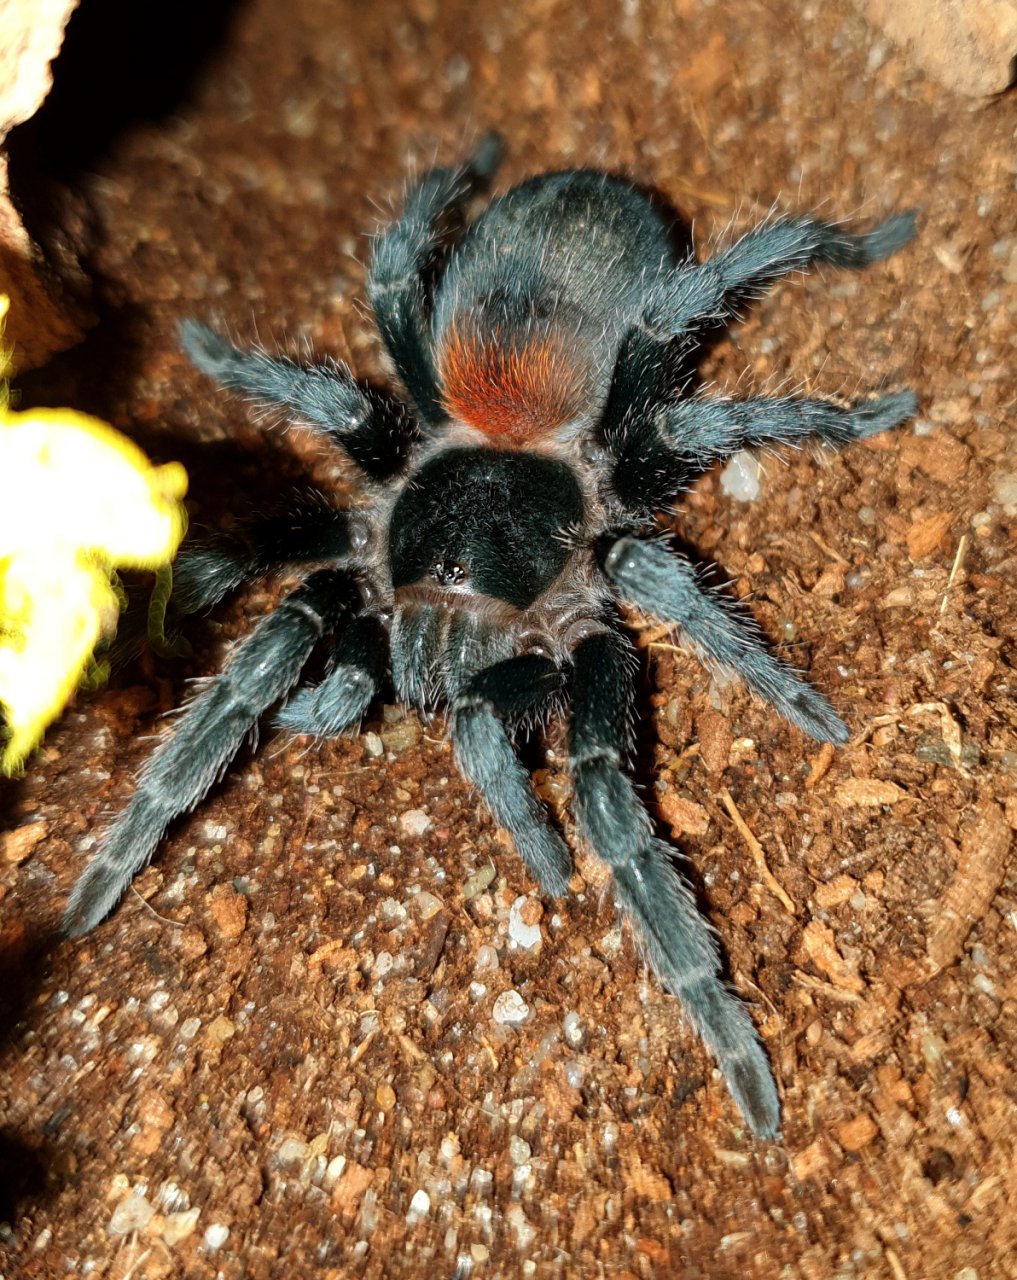 Freshly moulted H. chilensis